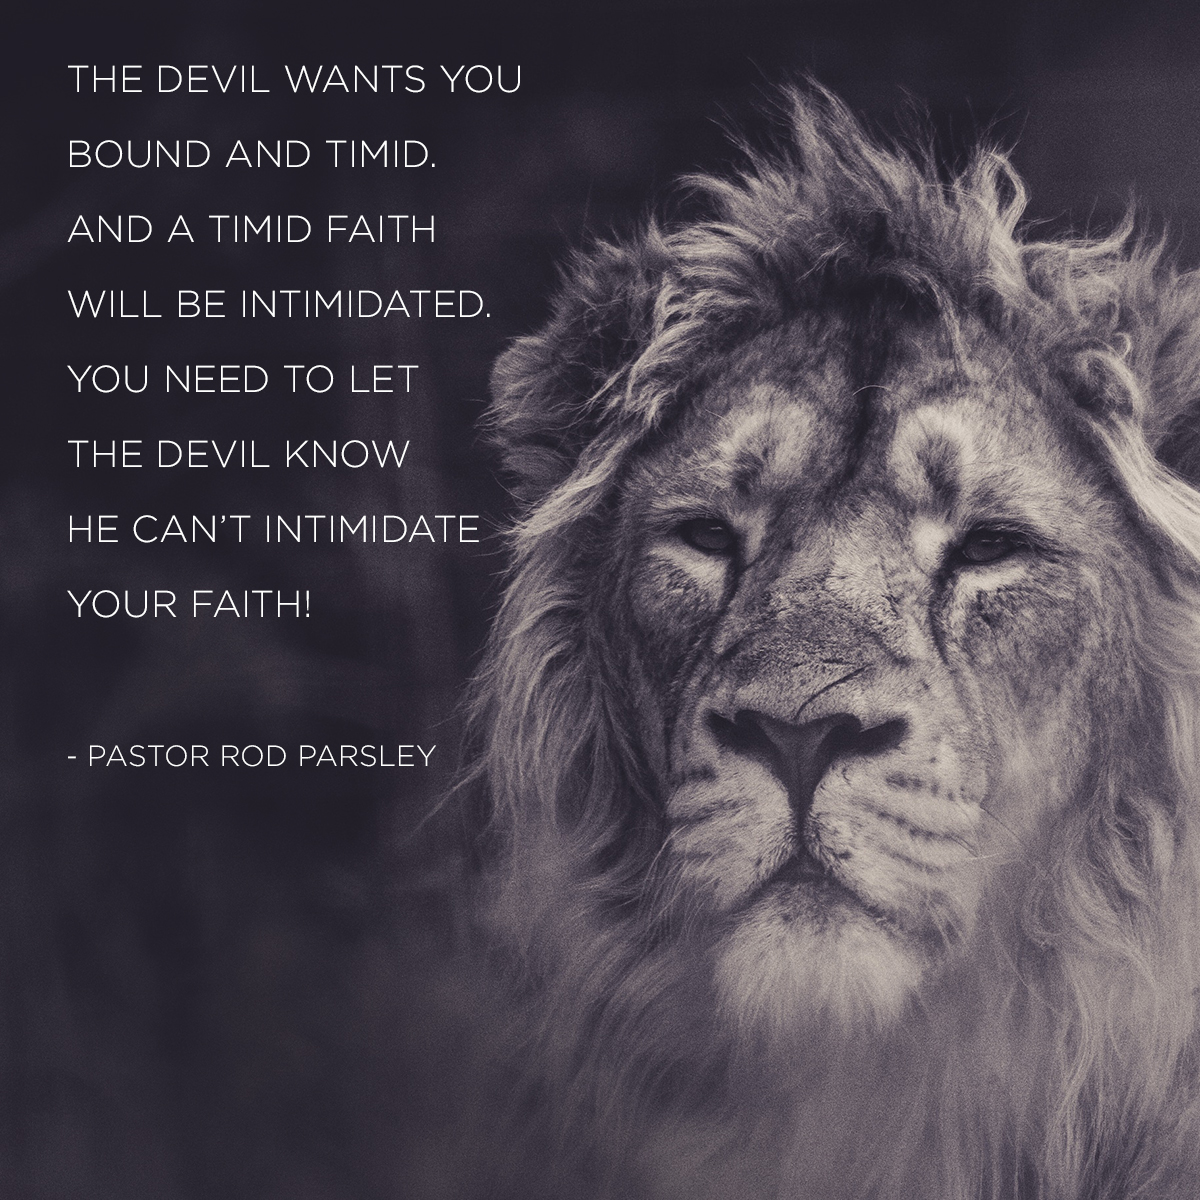 “The devil wants you bound and timid. And a timid faith will be intimidated. You need to let the devil know he can ’t intimidate your faith!” – Pastor Rod Parsley